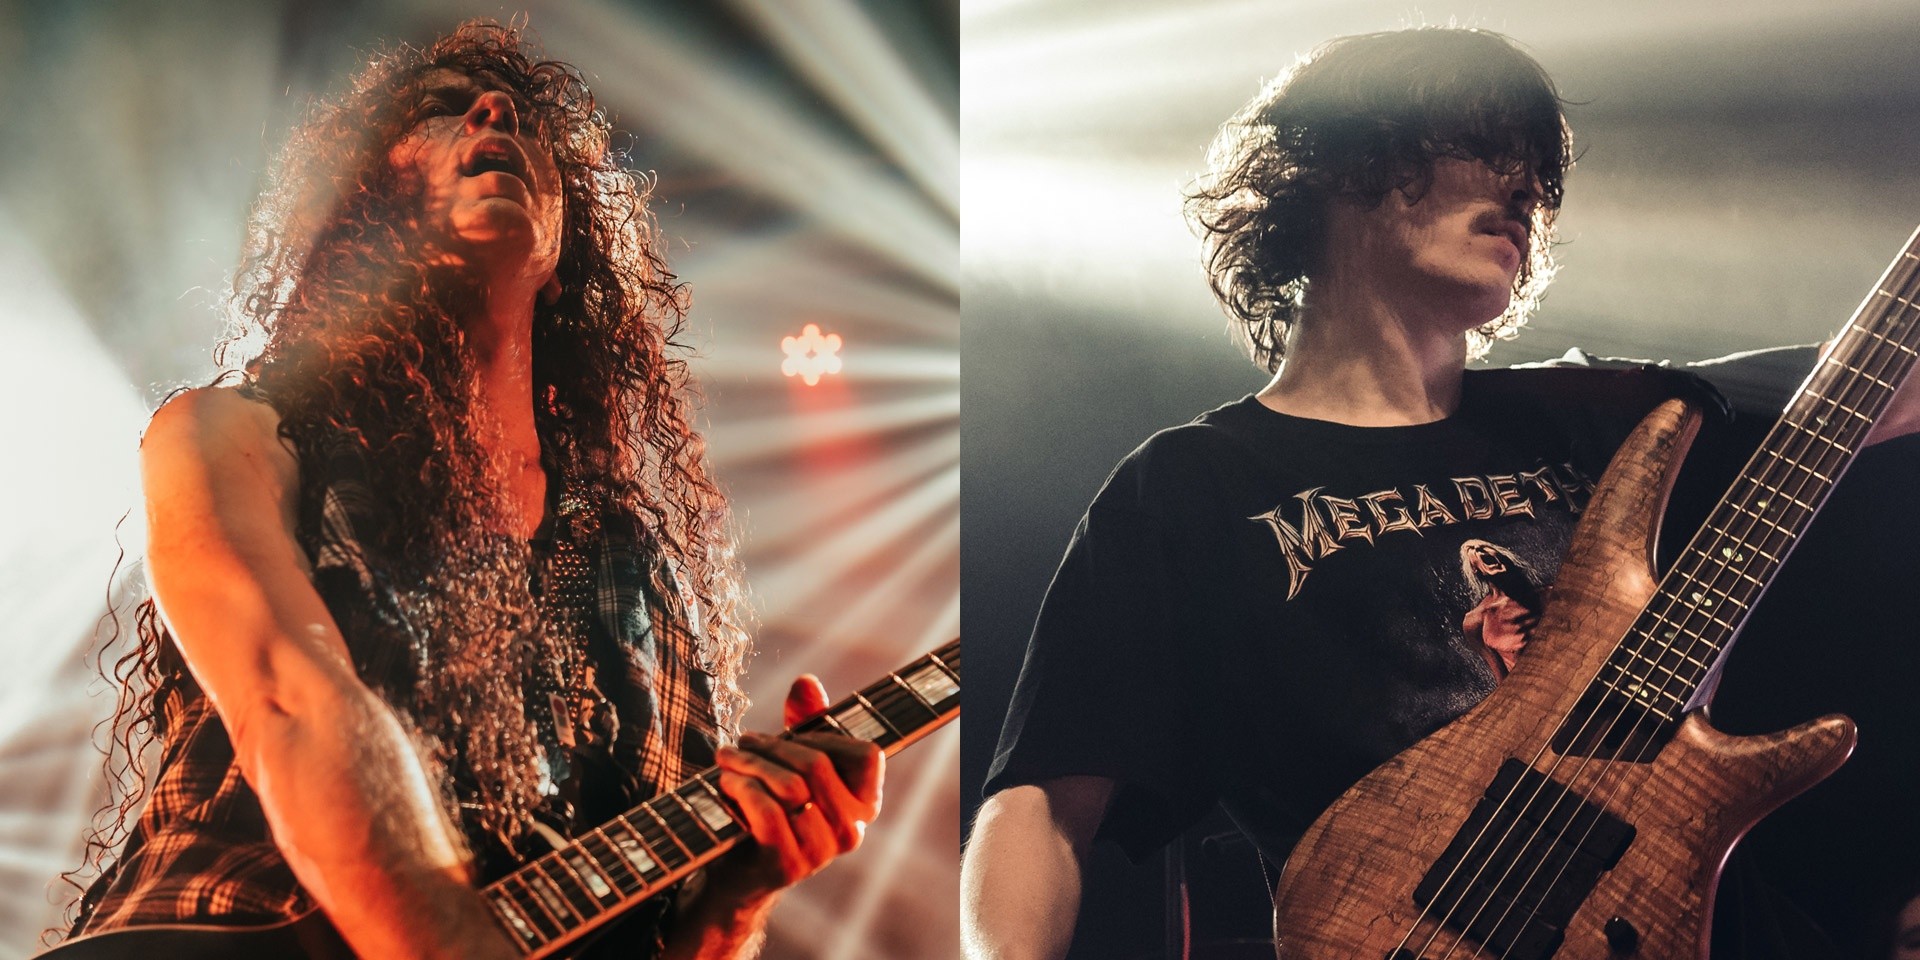 Polyphia & Marty Friedman deliver a scorching performance in Manila – gig report